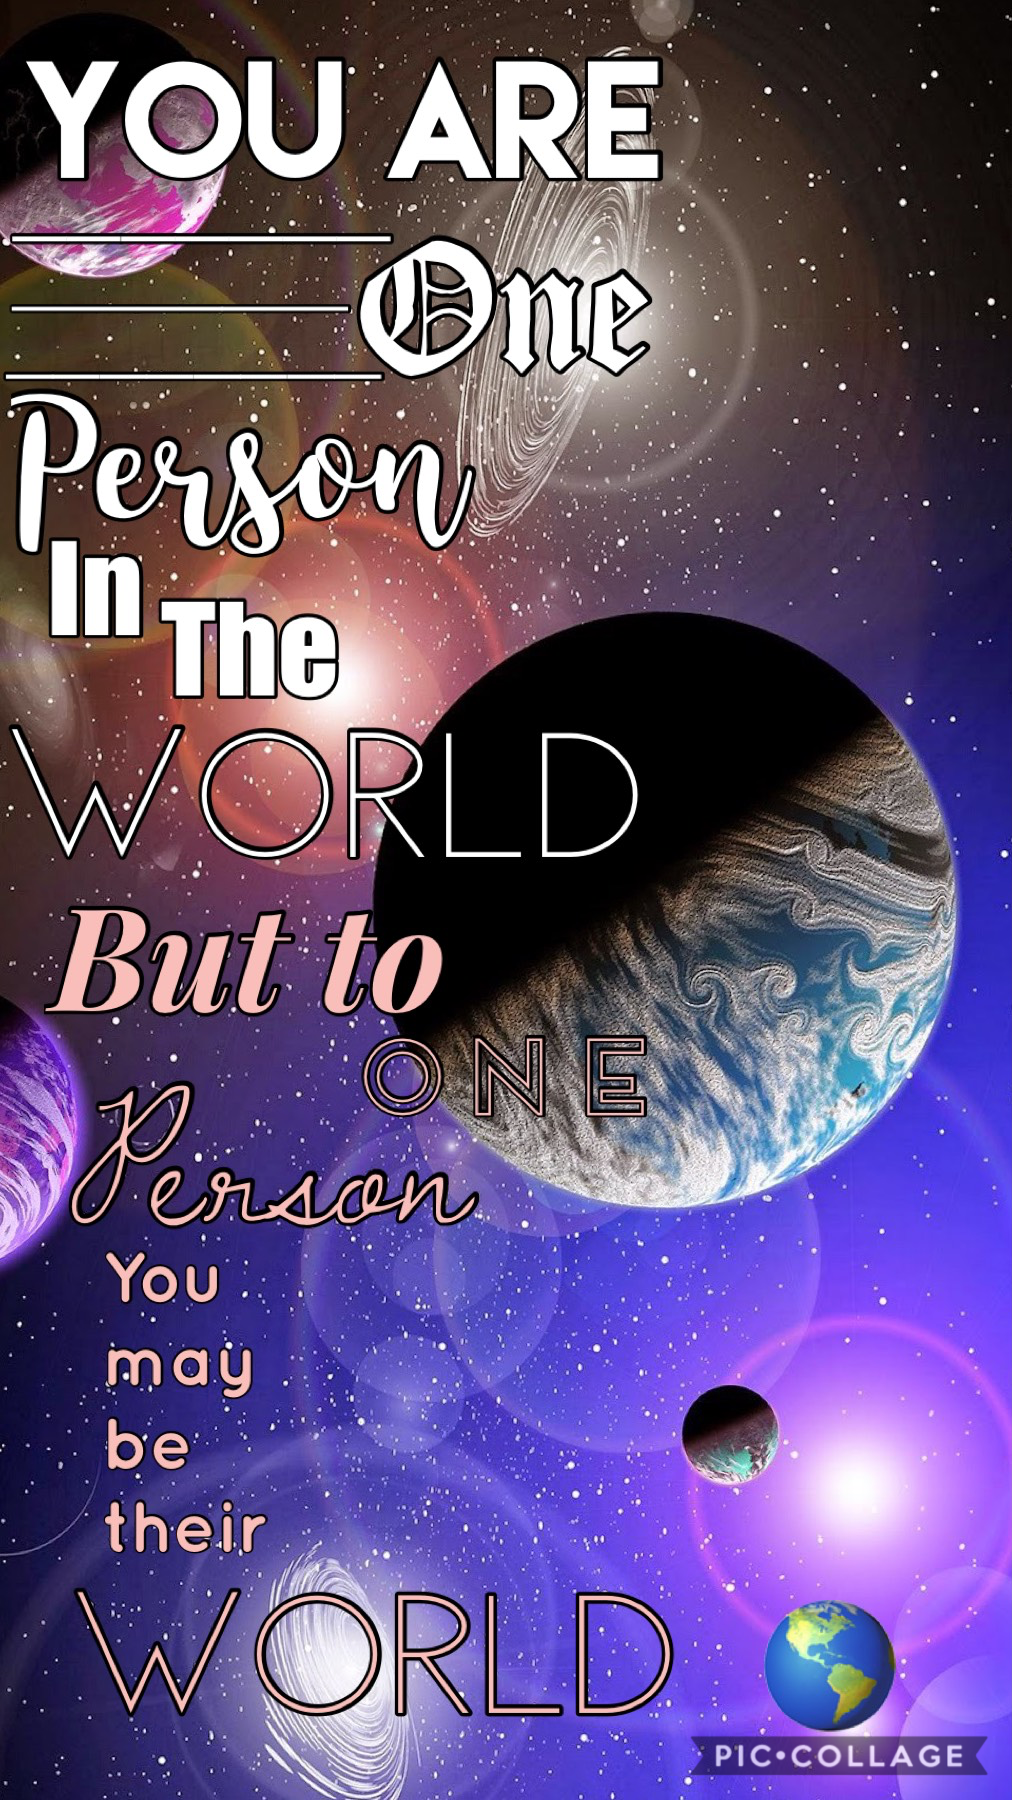 U r one person in the world but to one person u may be their world